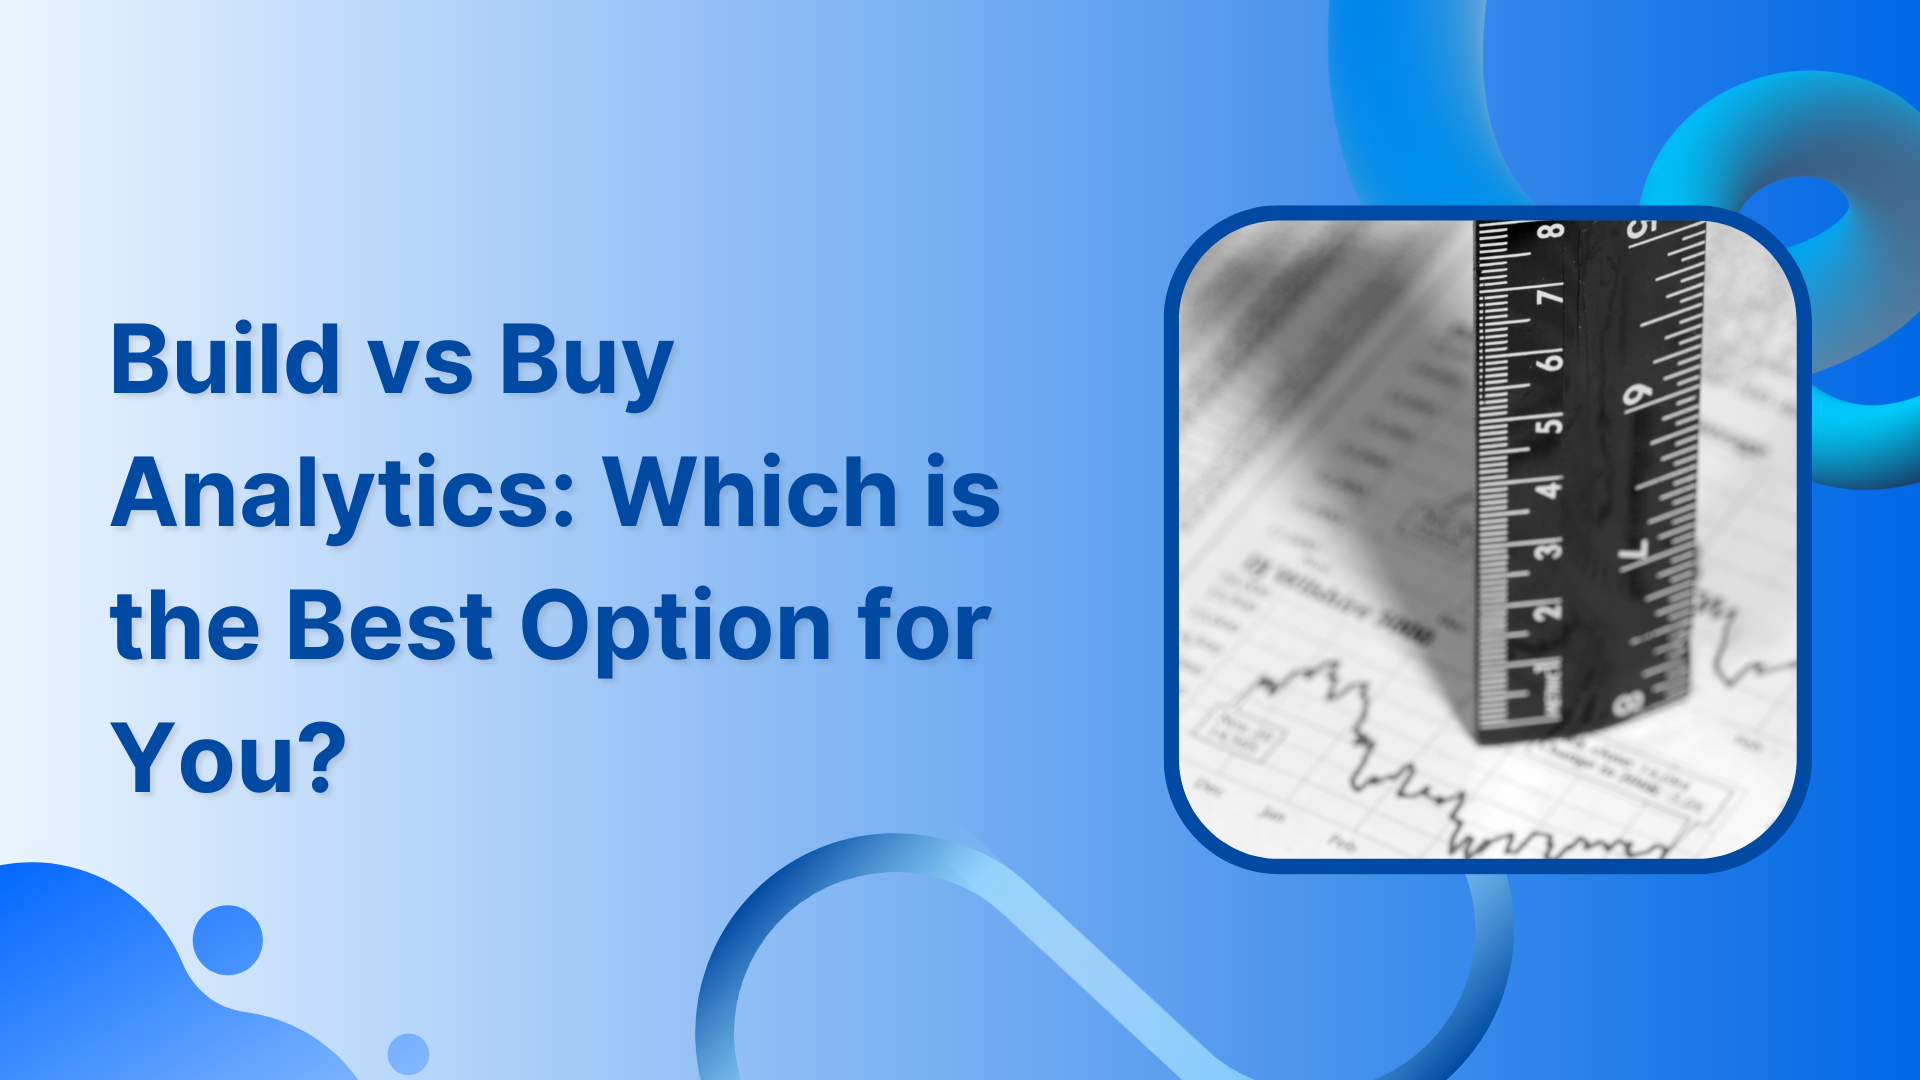 Build vs Buy Analytics: Which is the Best Option for You?